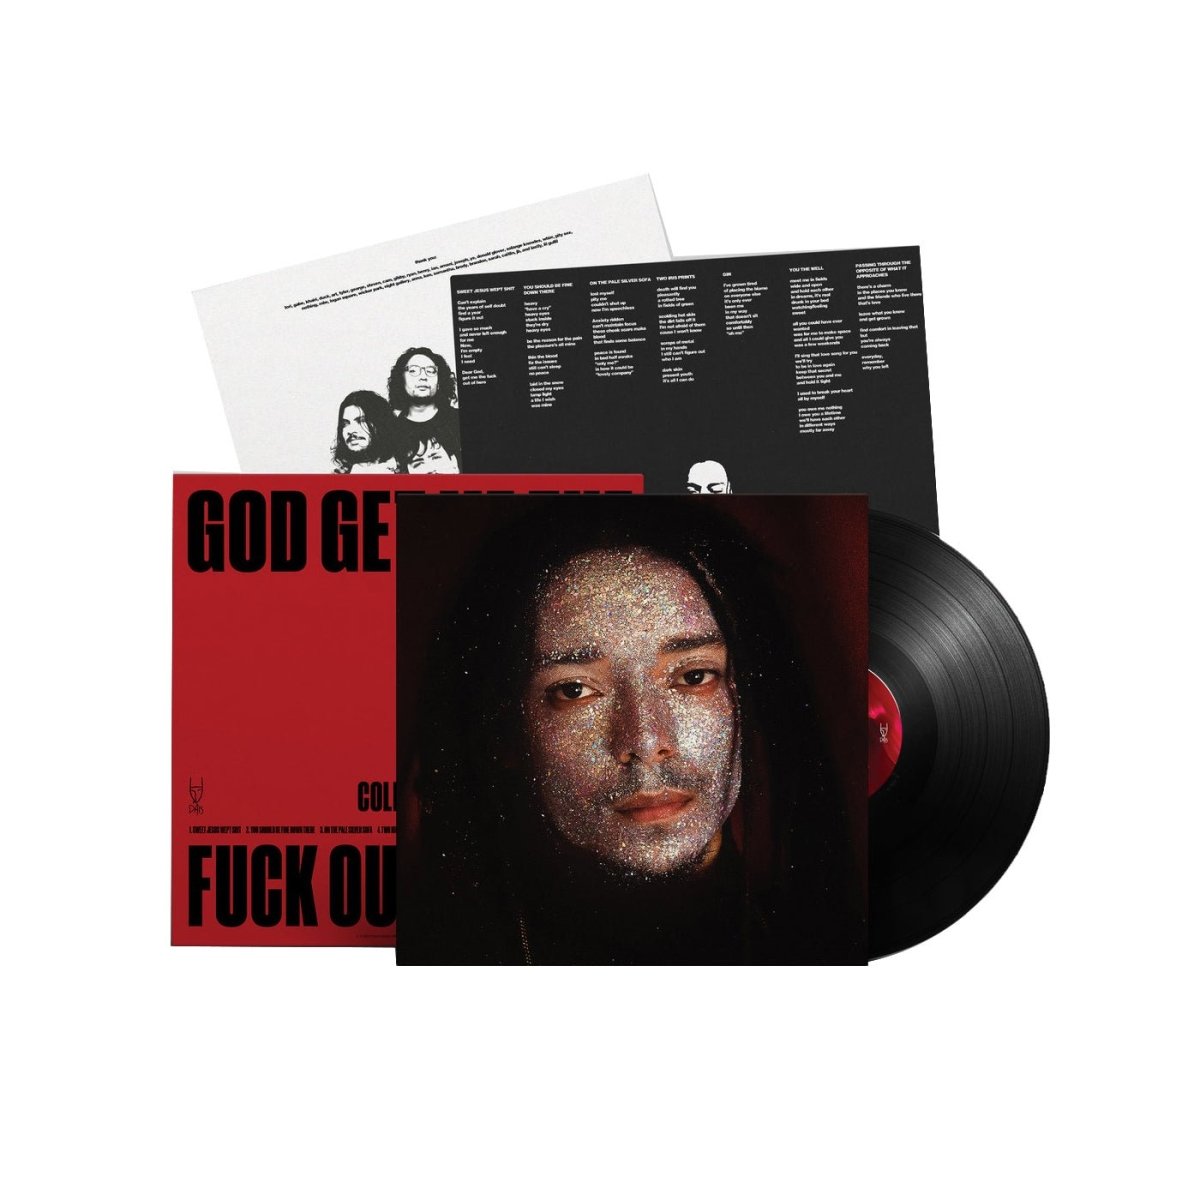 Cold Gawd - God Get Me The Fuck Out Of Here Records & LPs Vinyl